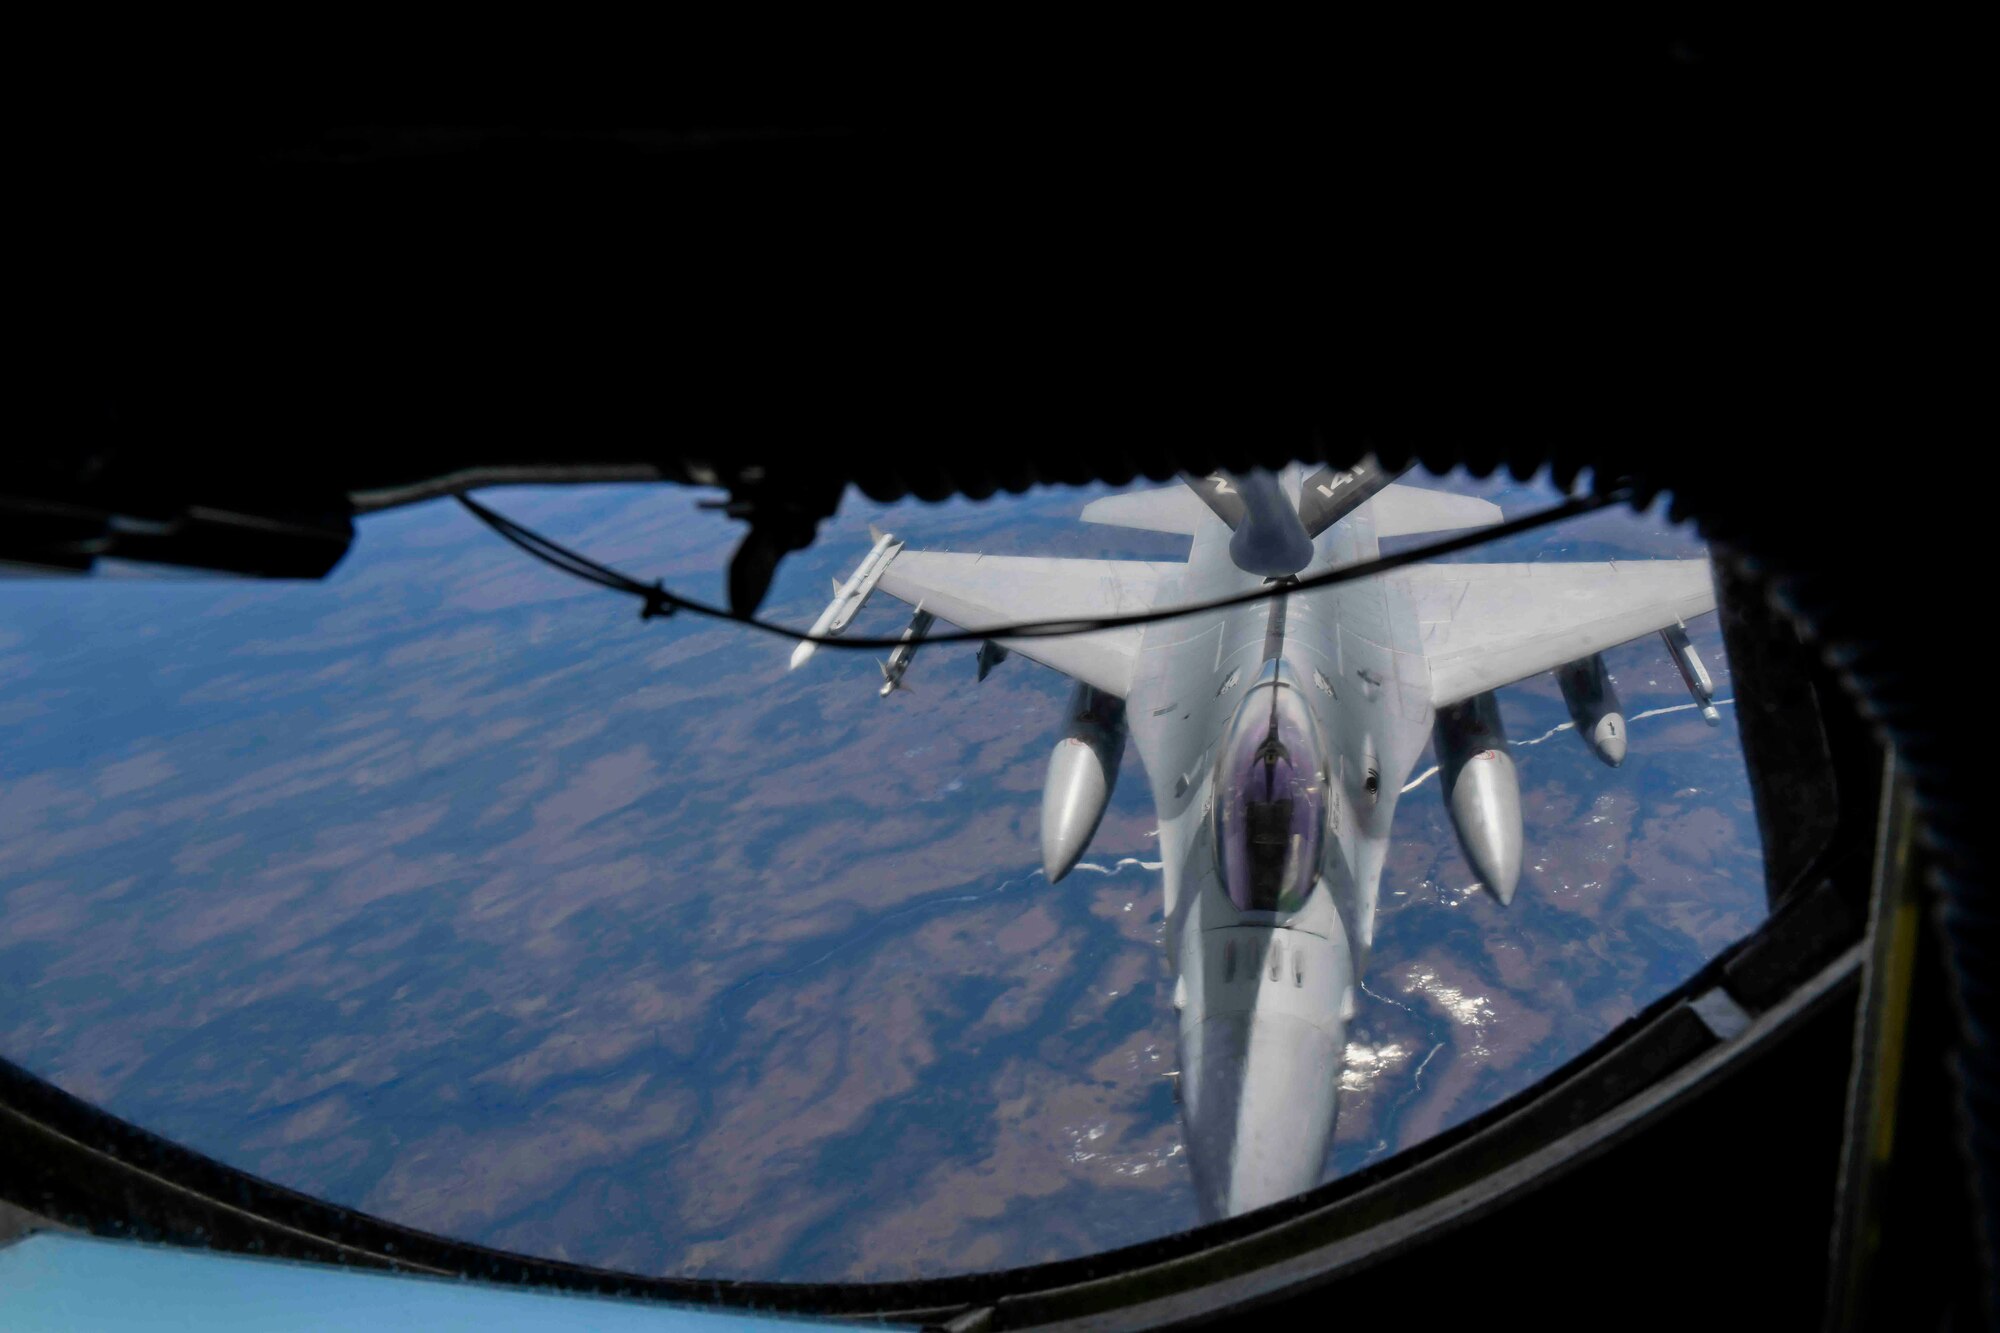 A U.S. Air Force F-16 Fighting Falcon from 120th Fighter Squadron, Colorado Air National Guard, joins up behind a KC-135 Stratotanker from the 141st Air Refueling Wing, Fairchild Air Force Base, to refuel during North American Aerospace Defense Command’s (NORAD) arctic air defense exercise, Amalgam Dart 21-01, June 12, 2021. Exercise Amalgam Dart will run from June 10-19, 2021, with operations ranging across the Arctic from the Beaufort Sea to Thule, Greenland. Amalgam Dart 21-01 provides NORAD the opportunity to hone continental defense skills as Canadian and U.S. forces operate together in the Arctic. A bi-national Canadian and American command, NORAD employs a network of space-based, aerial and ground-based sensors, air-to-air refueling tankers, and fighter aircraft, controlled by a sophisticated command and control network to deter, deny and defeat aerospace threats that originate outside or within our borders. (U.S. Air Force photo by Airman 1st Class Kiaundra Miller)